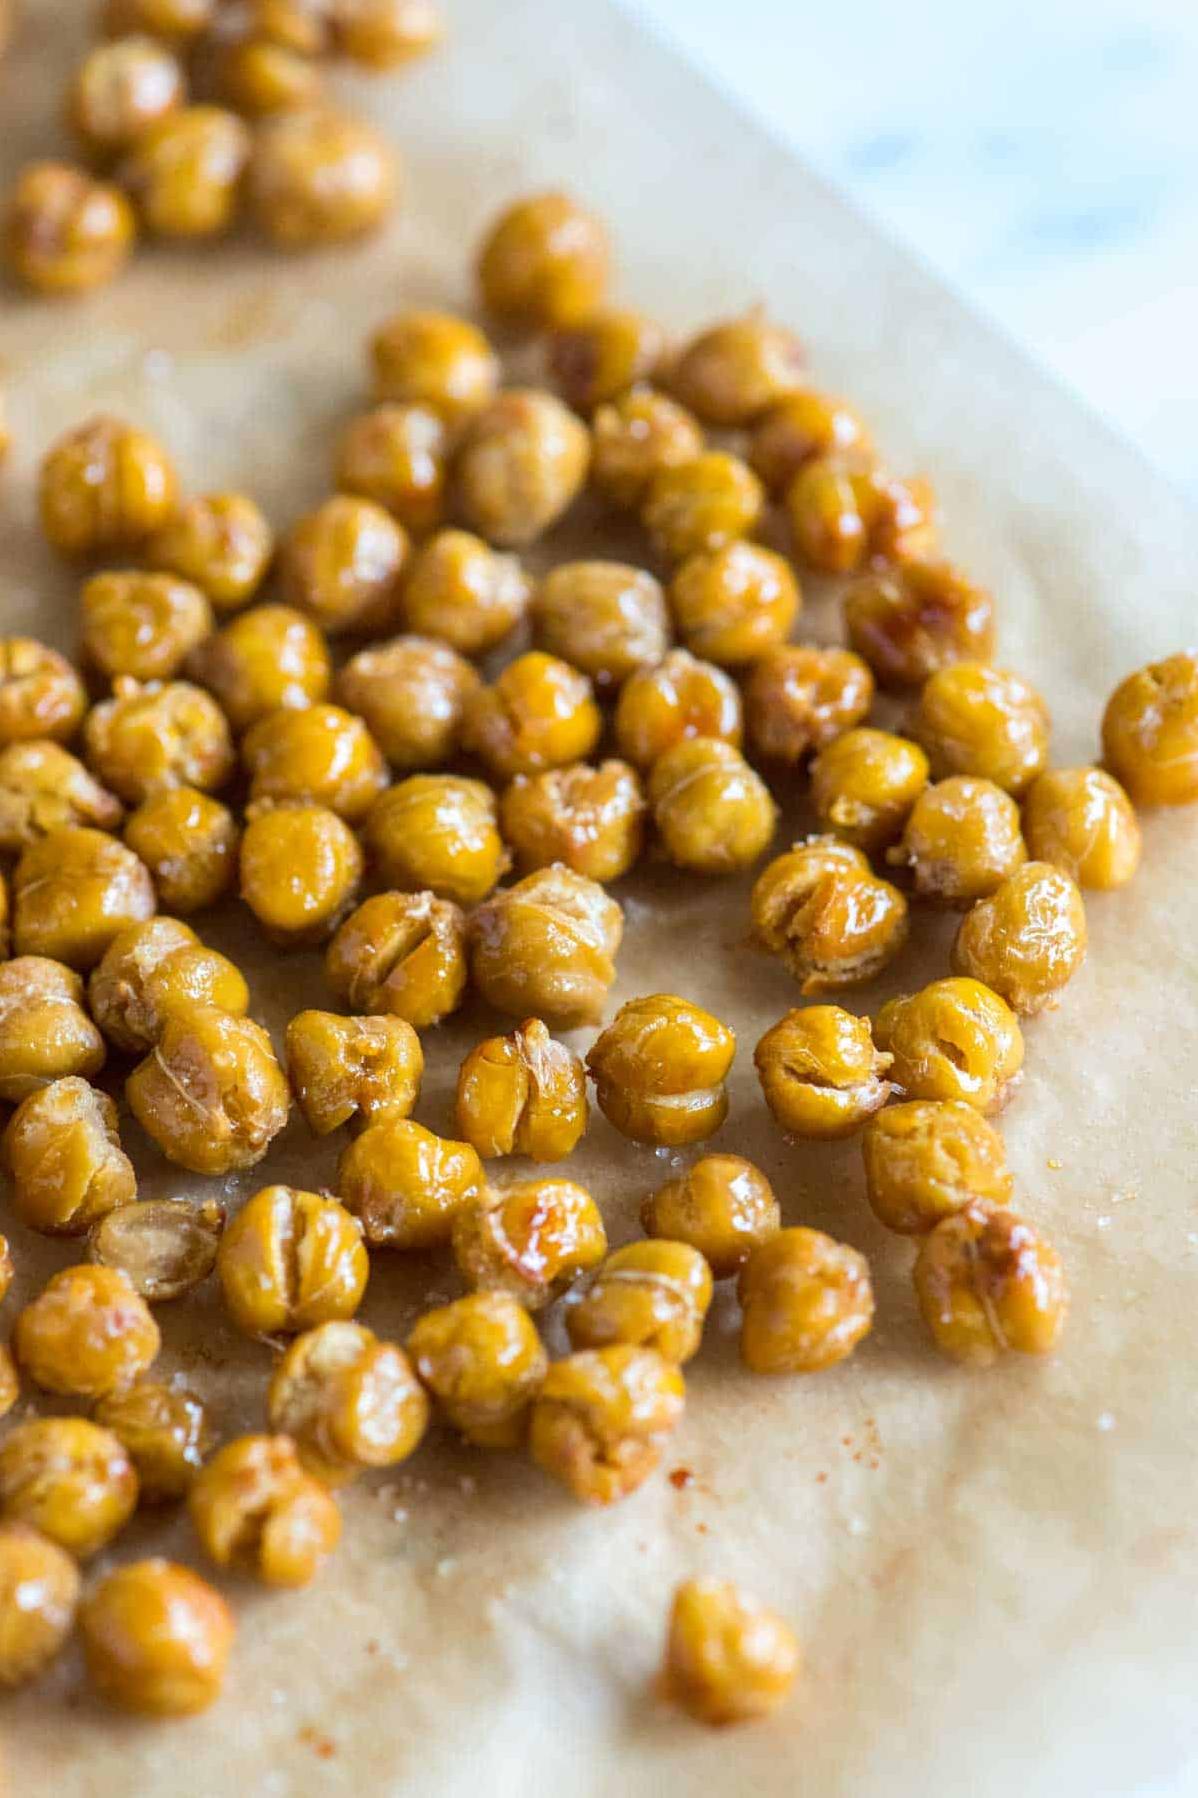  Take a break from potato chips and try these addictive honey roasted chickpeas instead.